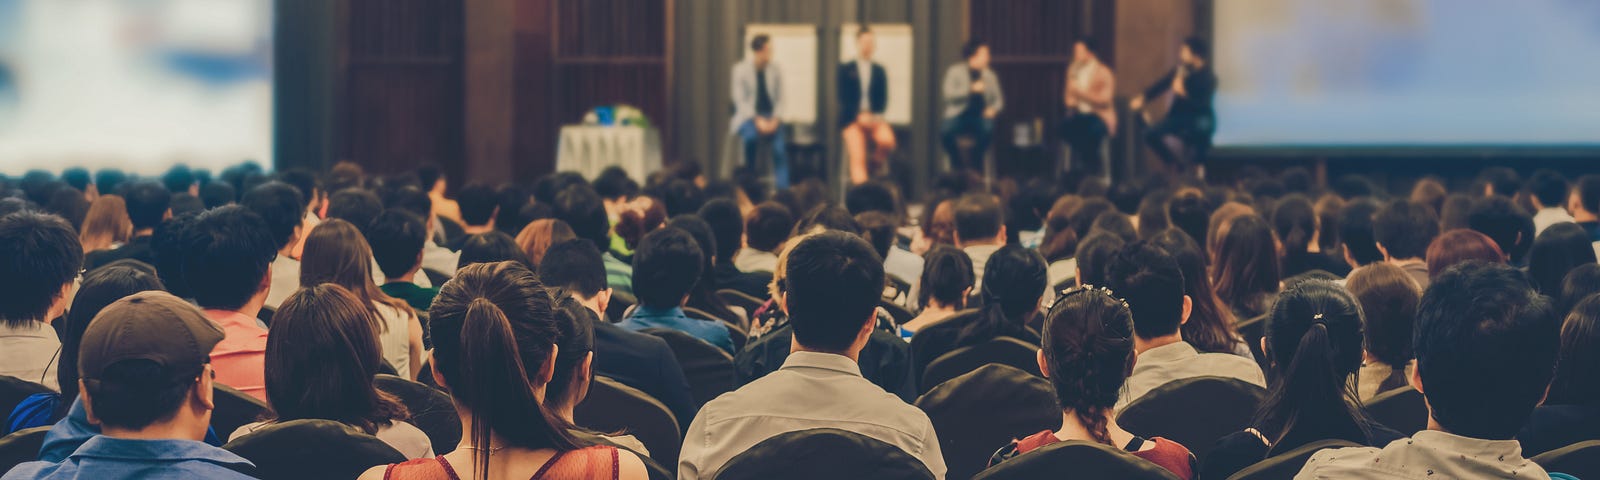 An audience listens to a speaker panel at an event.